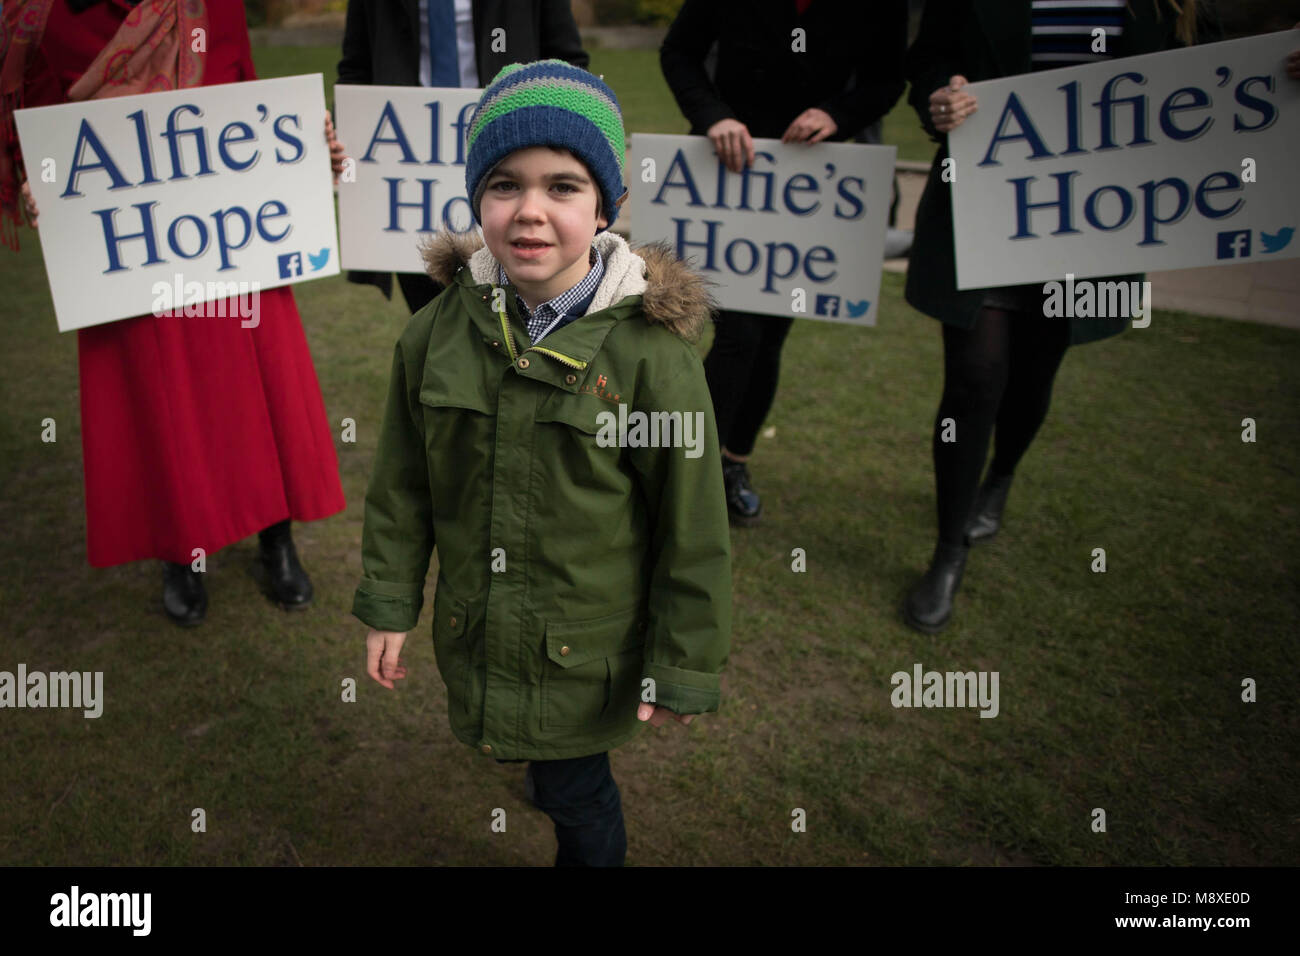 Six-year-old Alfie Dingley with supporters in Westminster, London, before handing in a 380,000-strong petition to Number 10 Downing Street asking for him to be given medicinal cannabis to treat his epilepsy. Stock Photo